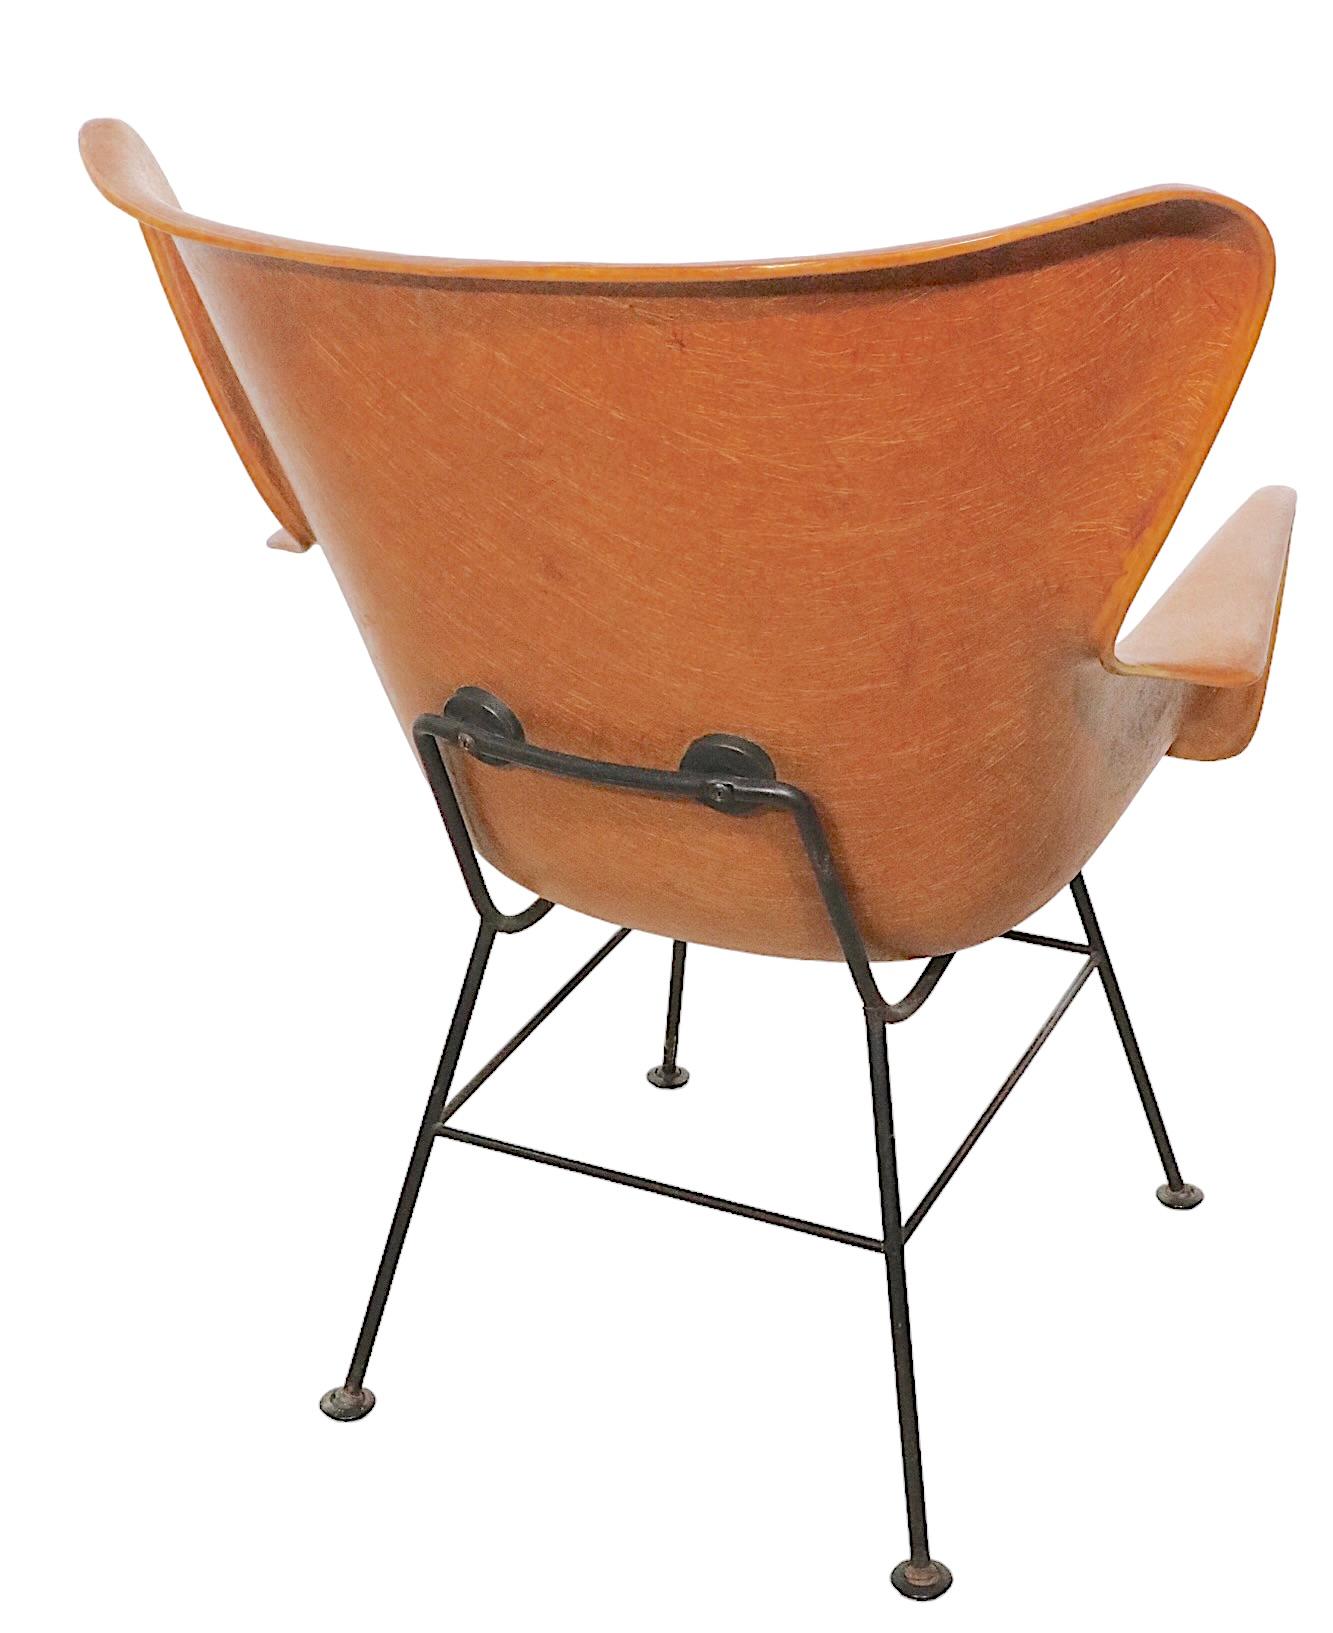 American Iconic Mid Century Fiberglass Wingback Chair by Peabody for Selig, circa 1950s For Sale